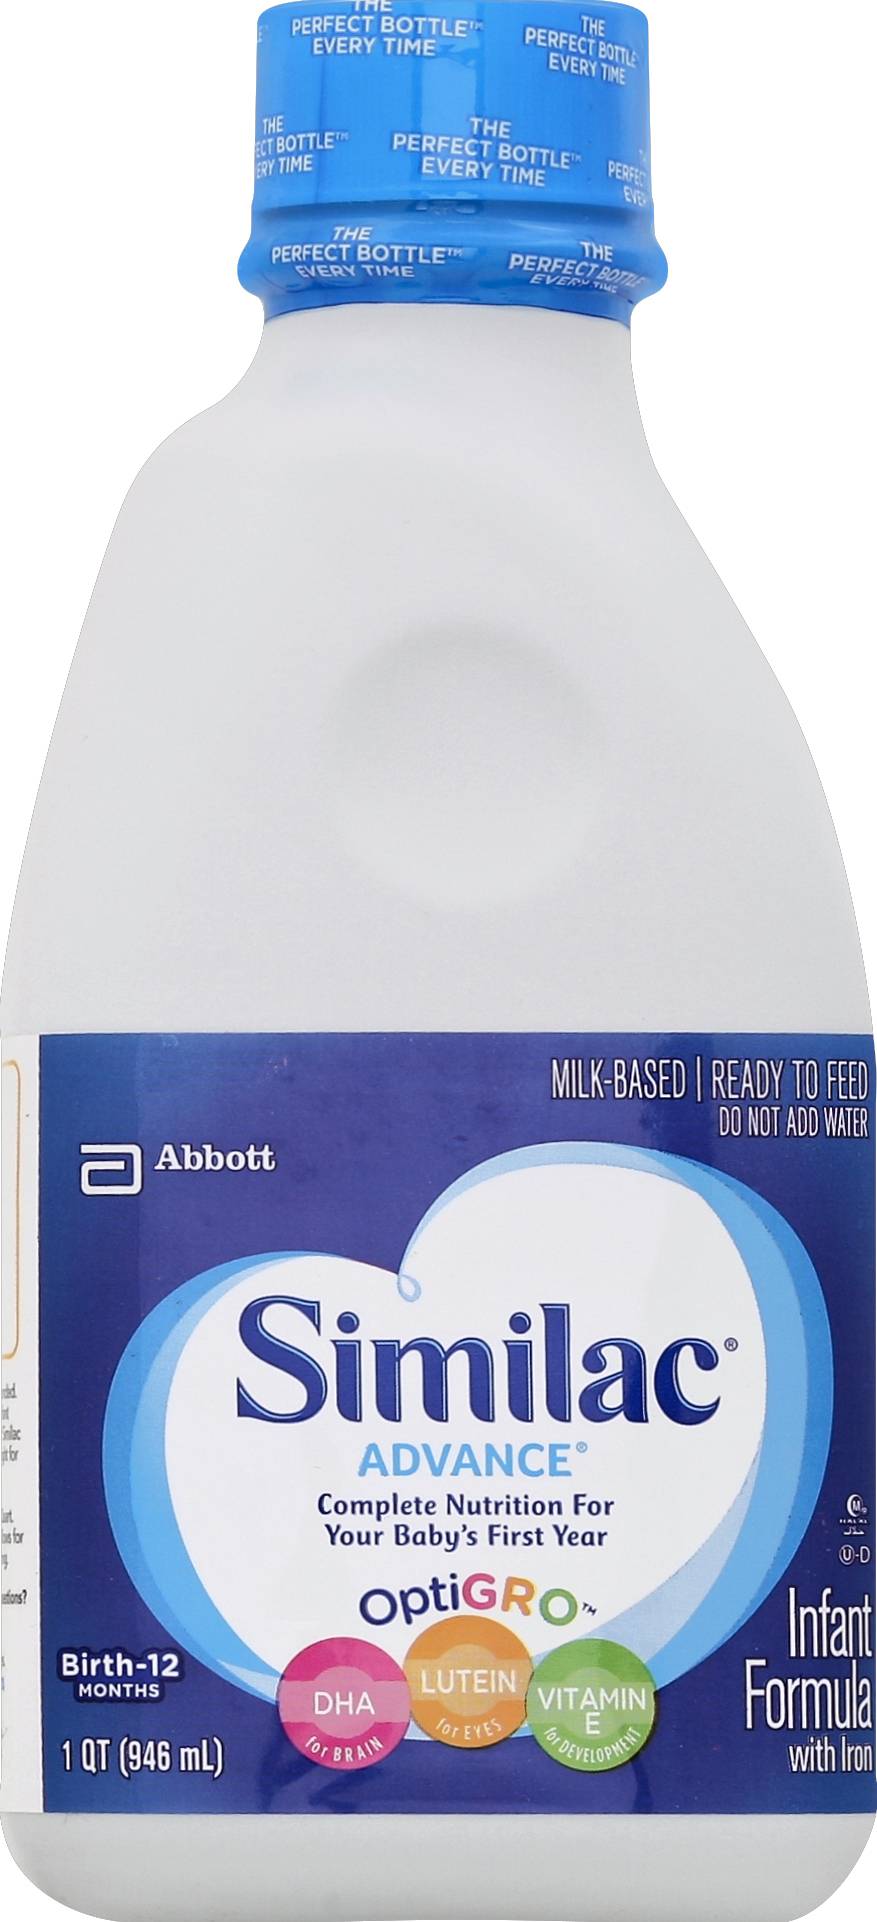 Similac Advance Infant Formula With Iron (0-12 months)